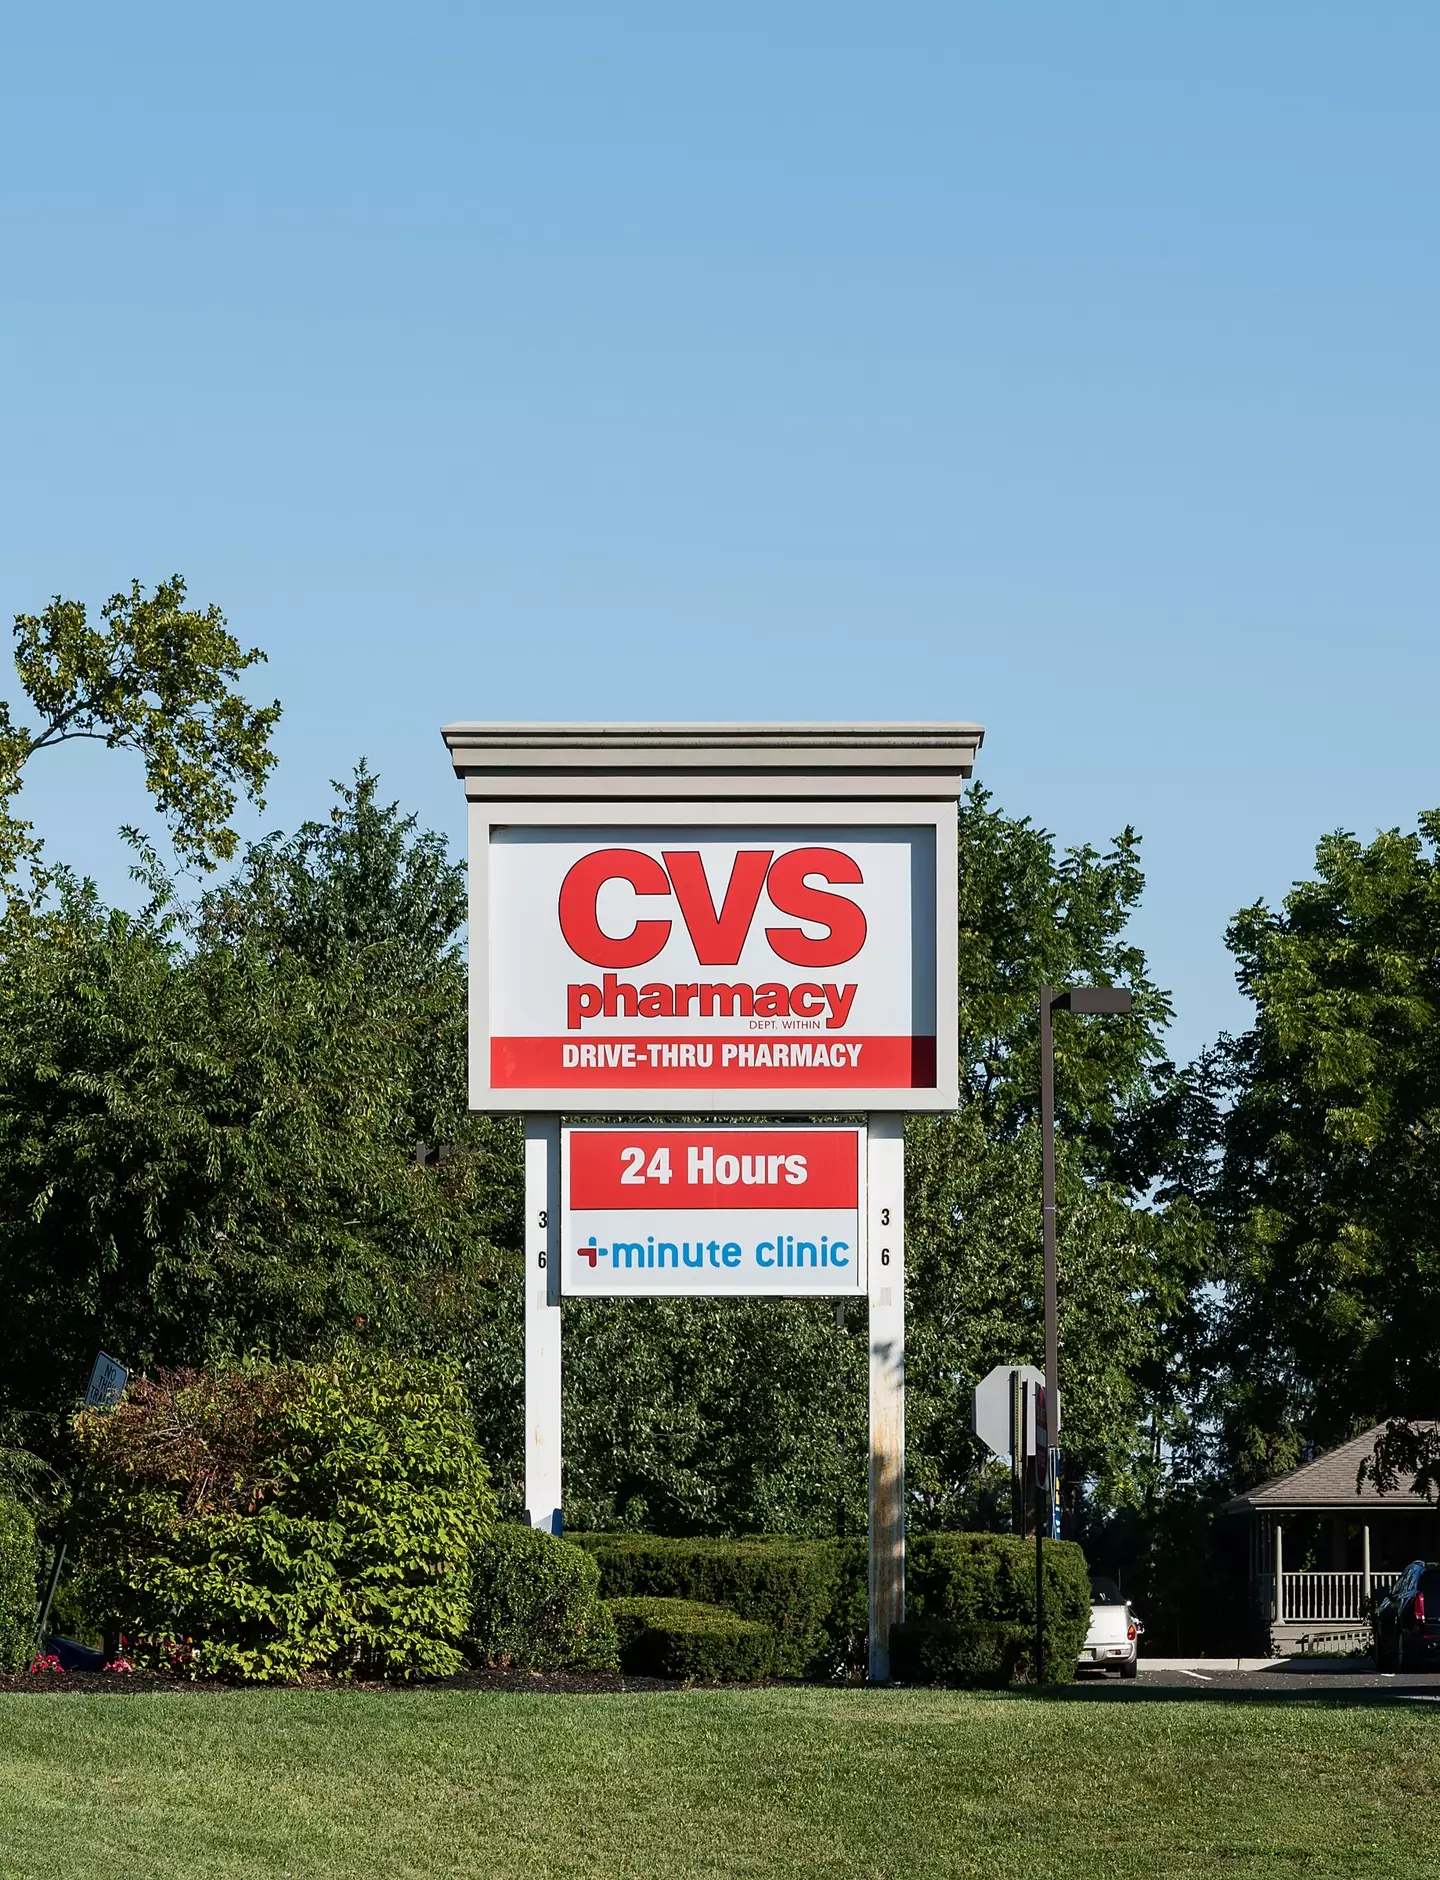 CVS was founded in 1963.